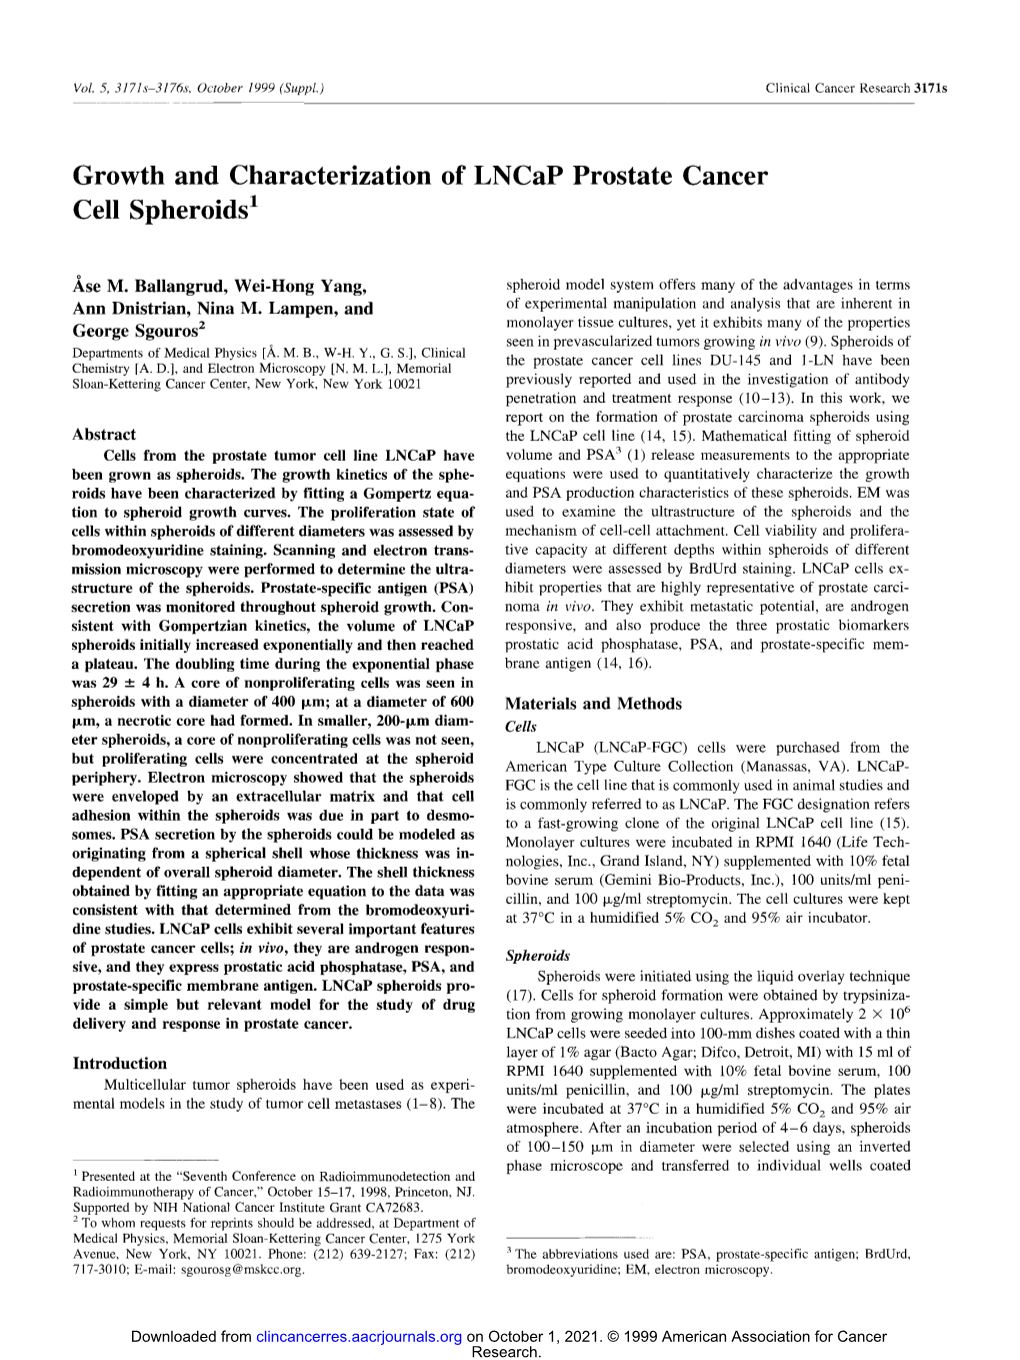 Growth and Characterization of Lncap Prostate Cancer Cell Spheroids 1